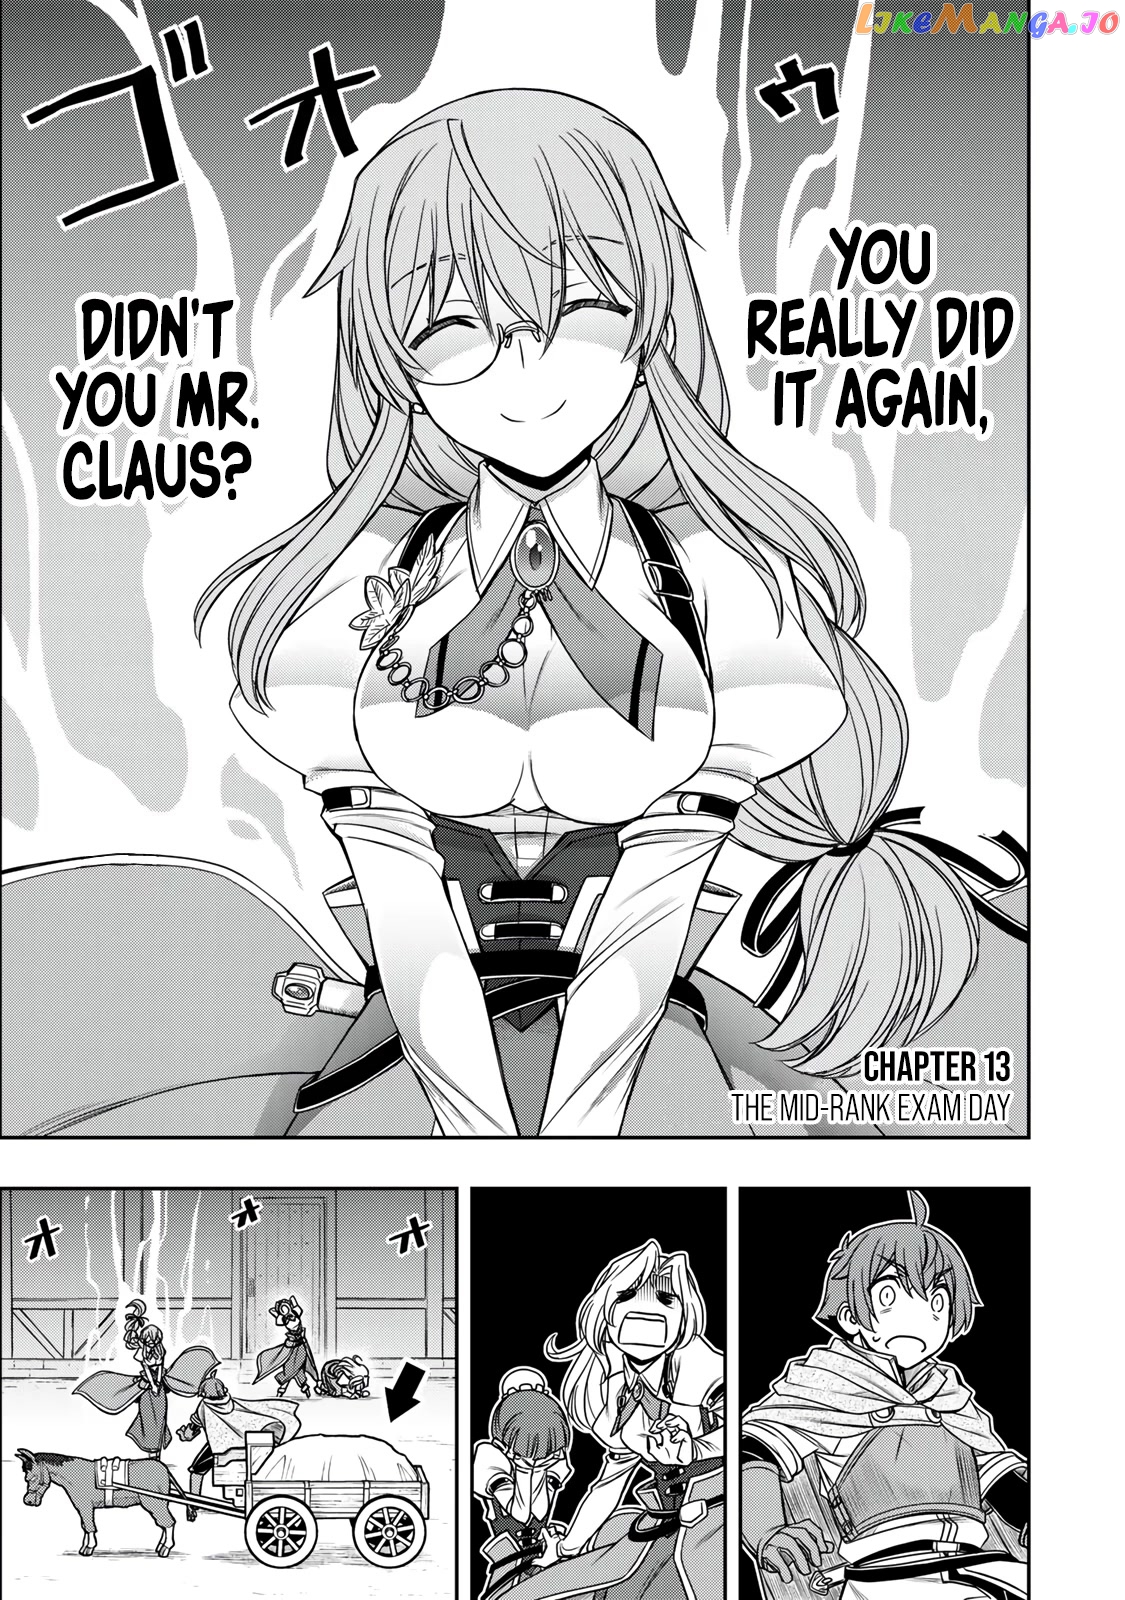 The Useless Skill [Auto Mode] Has Been Awakened ~Huh, Guild's Scout, Didn't You Say I Wasn't Needed Anymore?~ chapter 14 - page 2